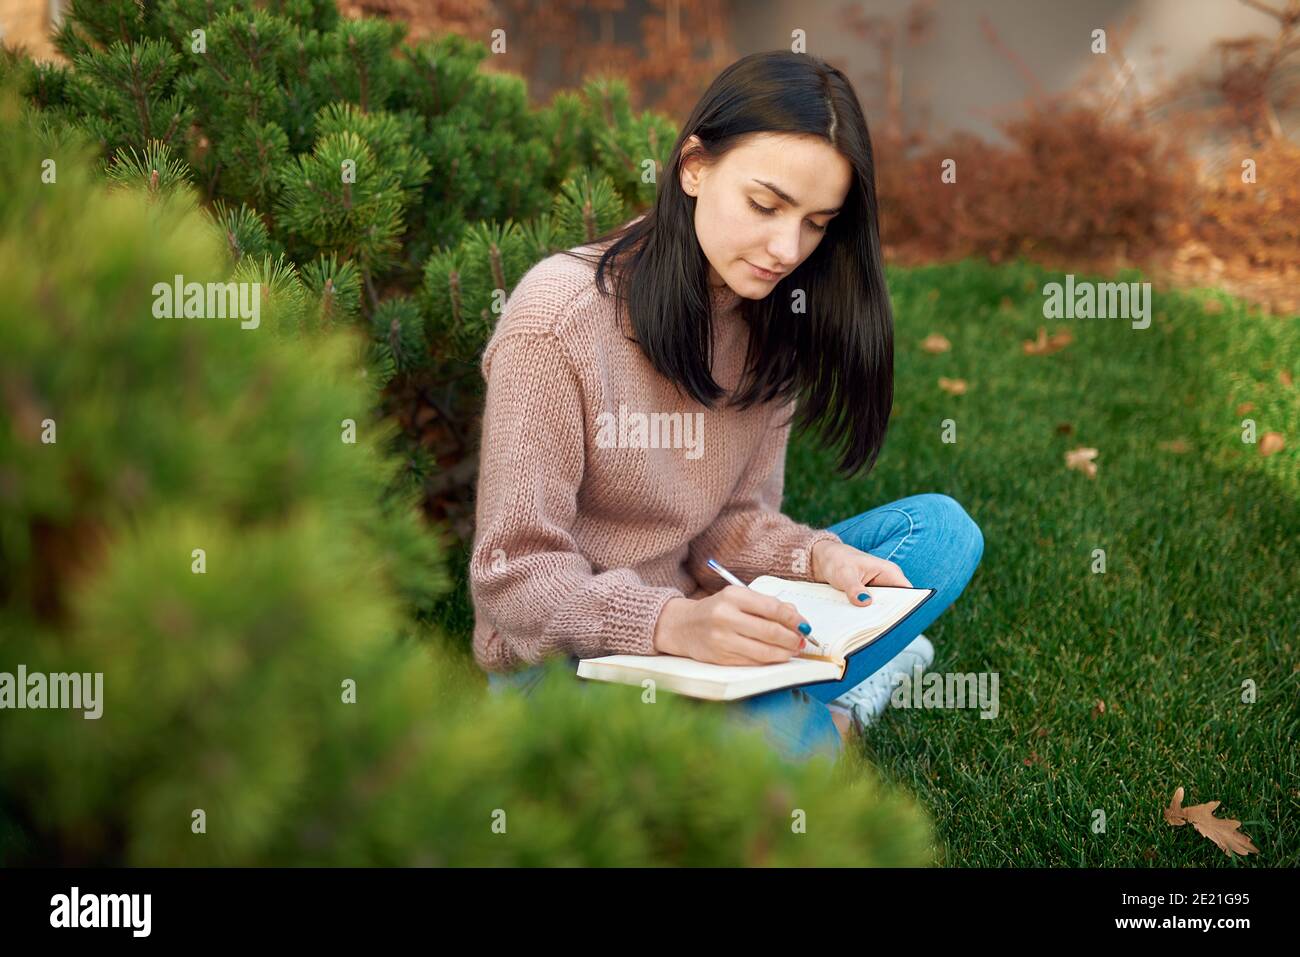 Pleasant young brunette with long hair is concentrated on writing on page of her notebook outside on an open lawn Stock Photo